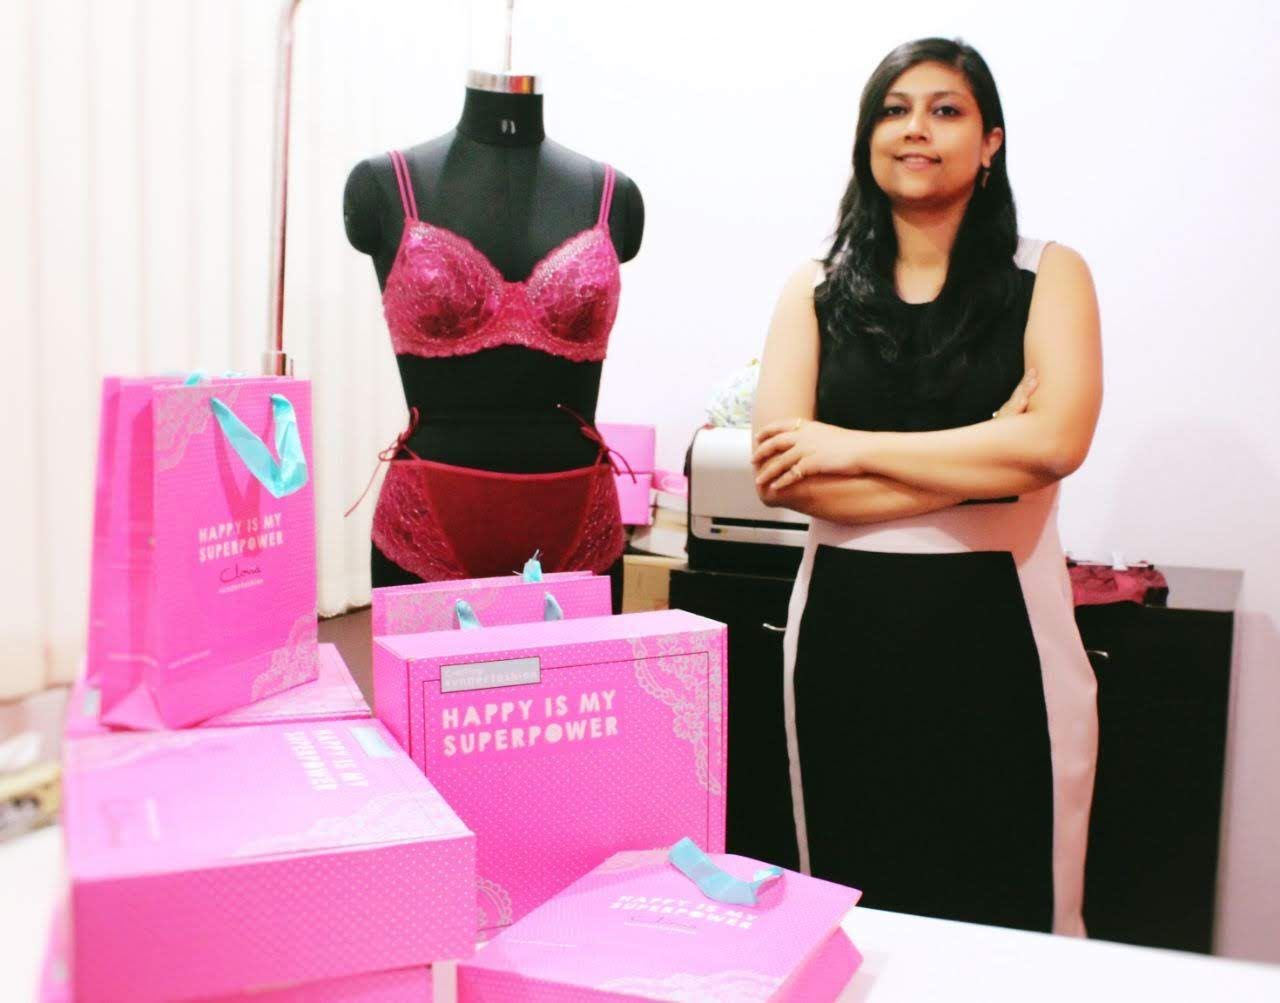 Women's innerwear market is pegged to touch $12B by 2025: RedSeer